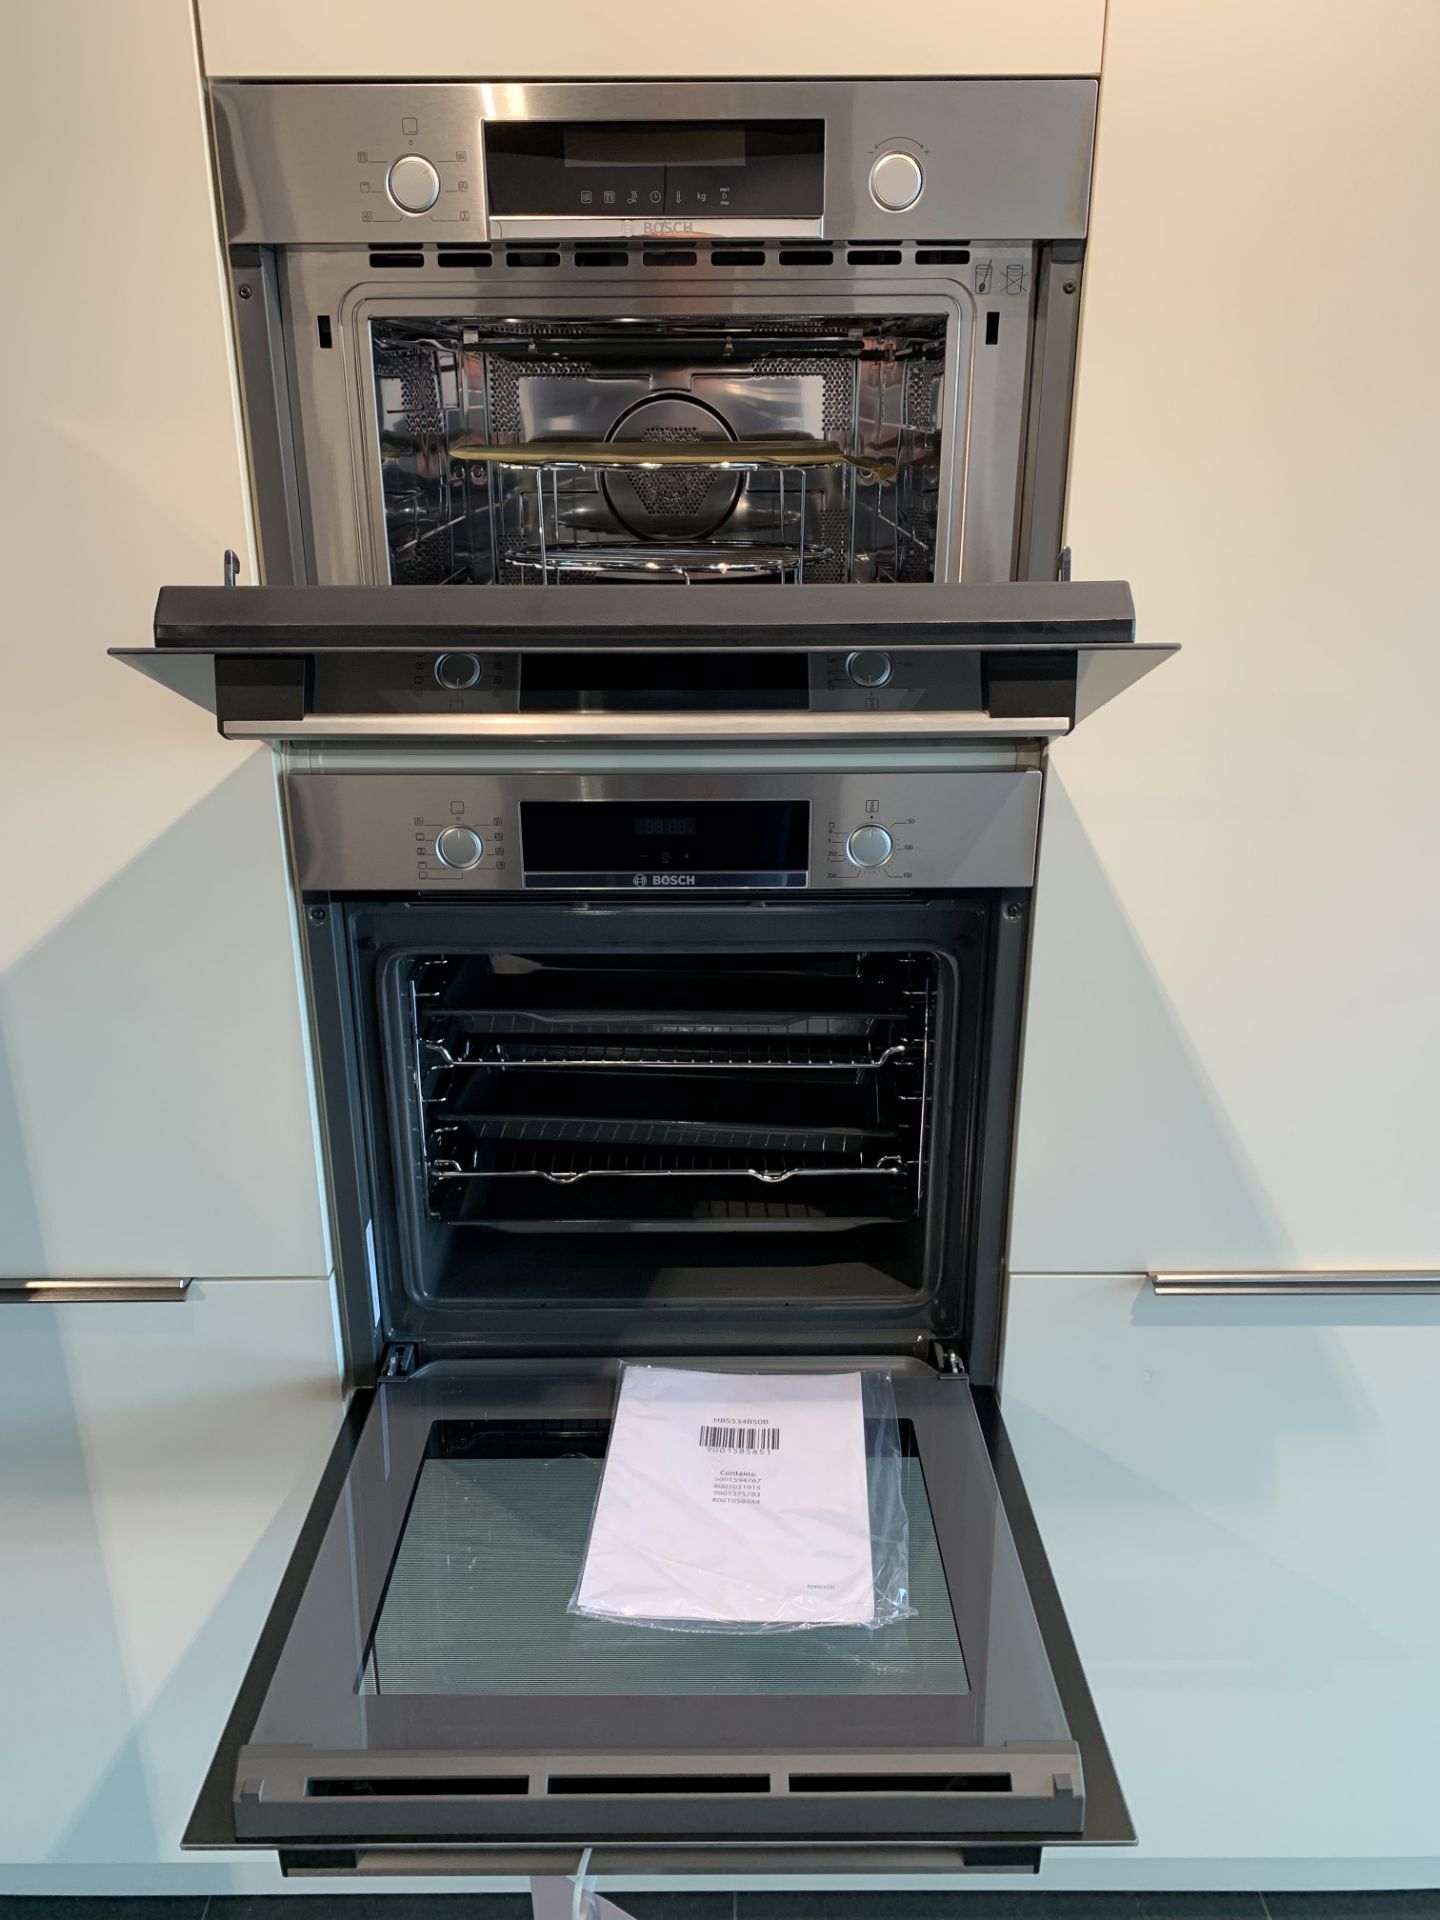 New & Unboxed Bosch Double Oven - Image 2 of 2